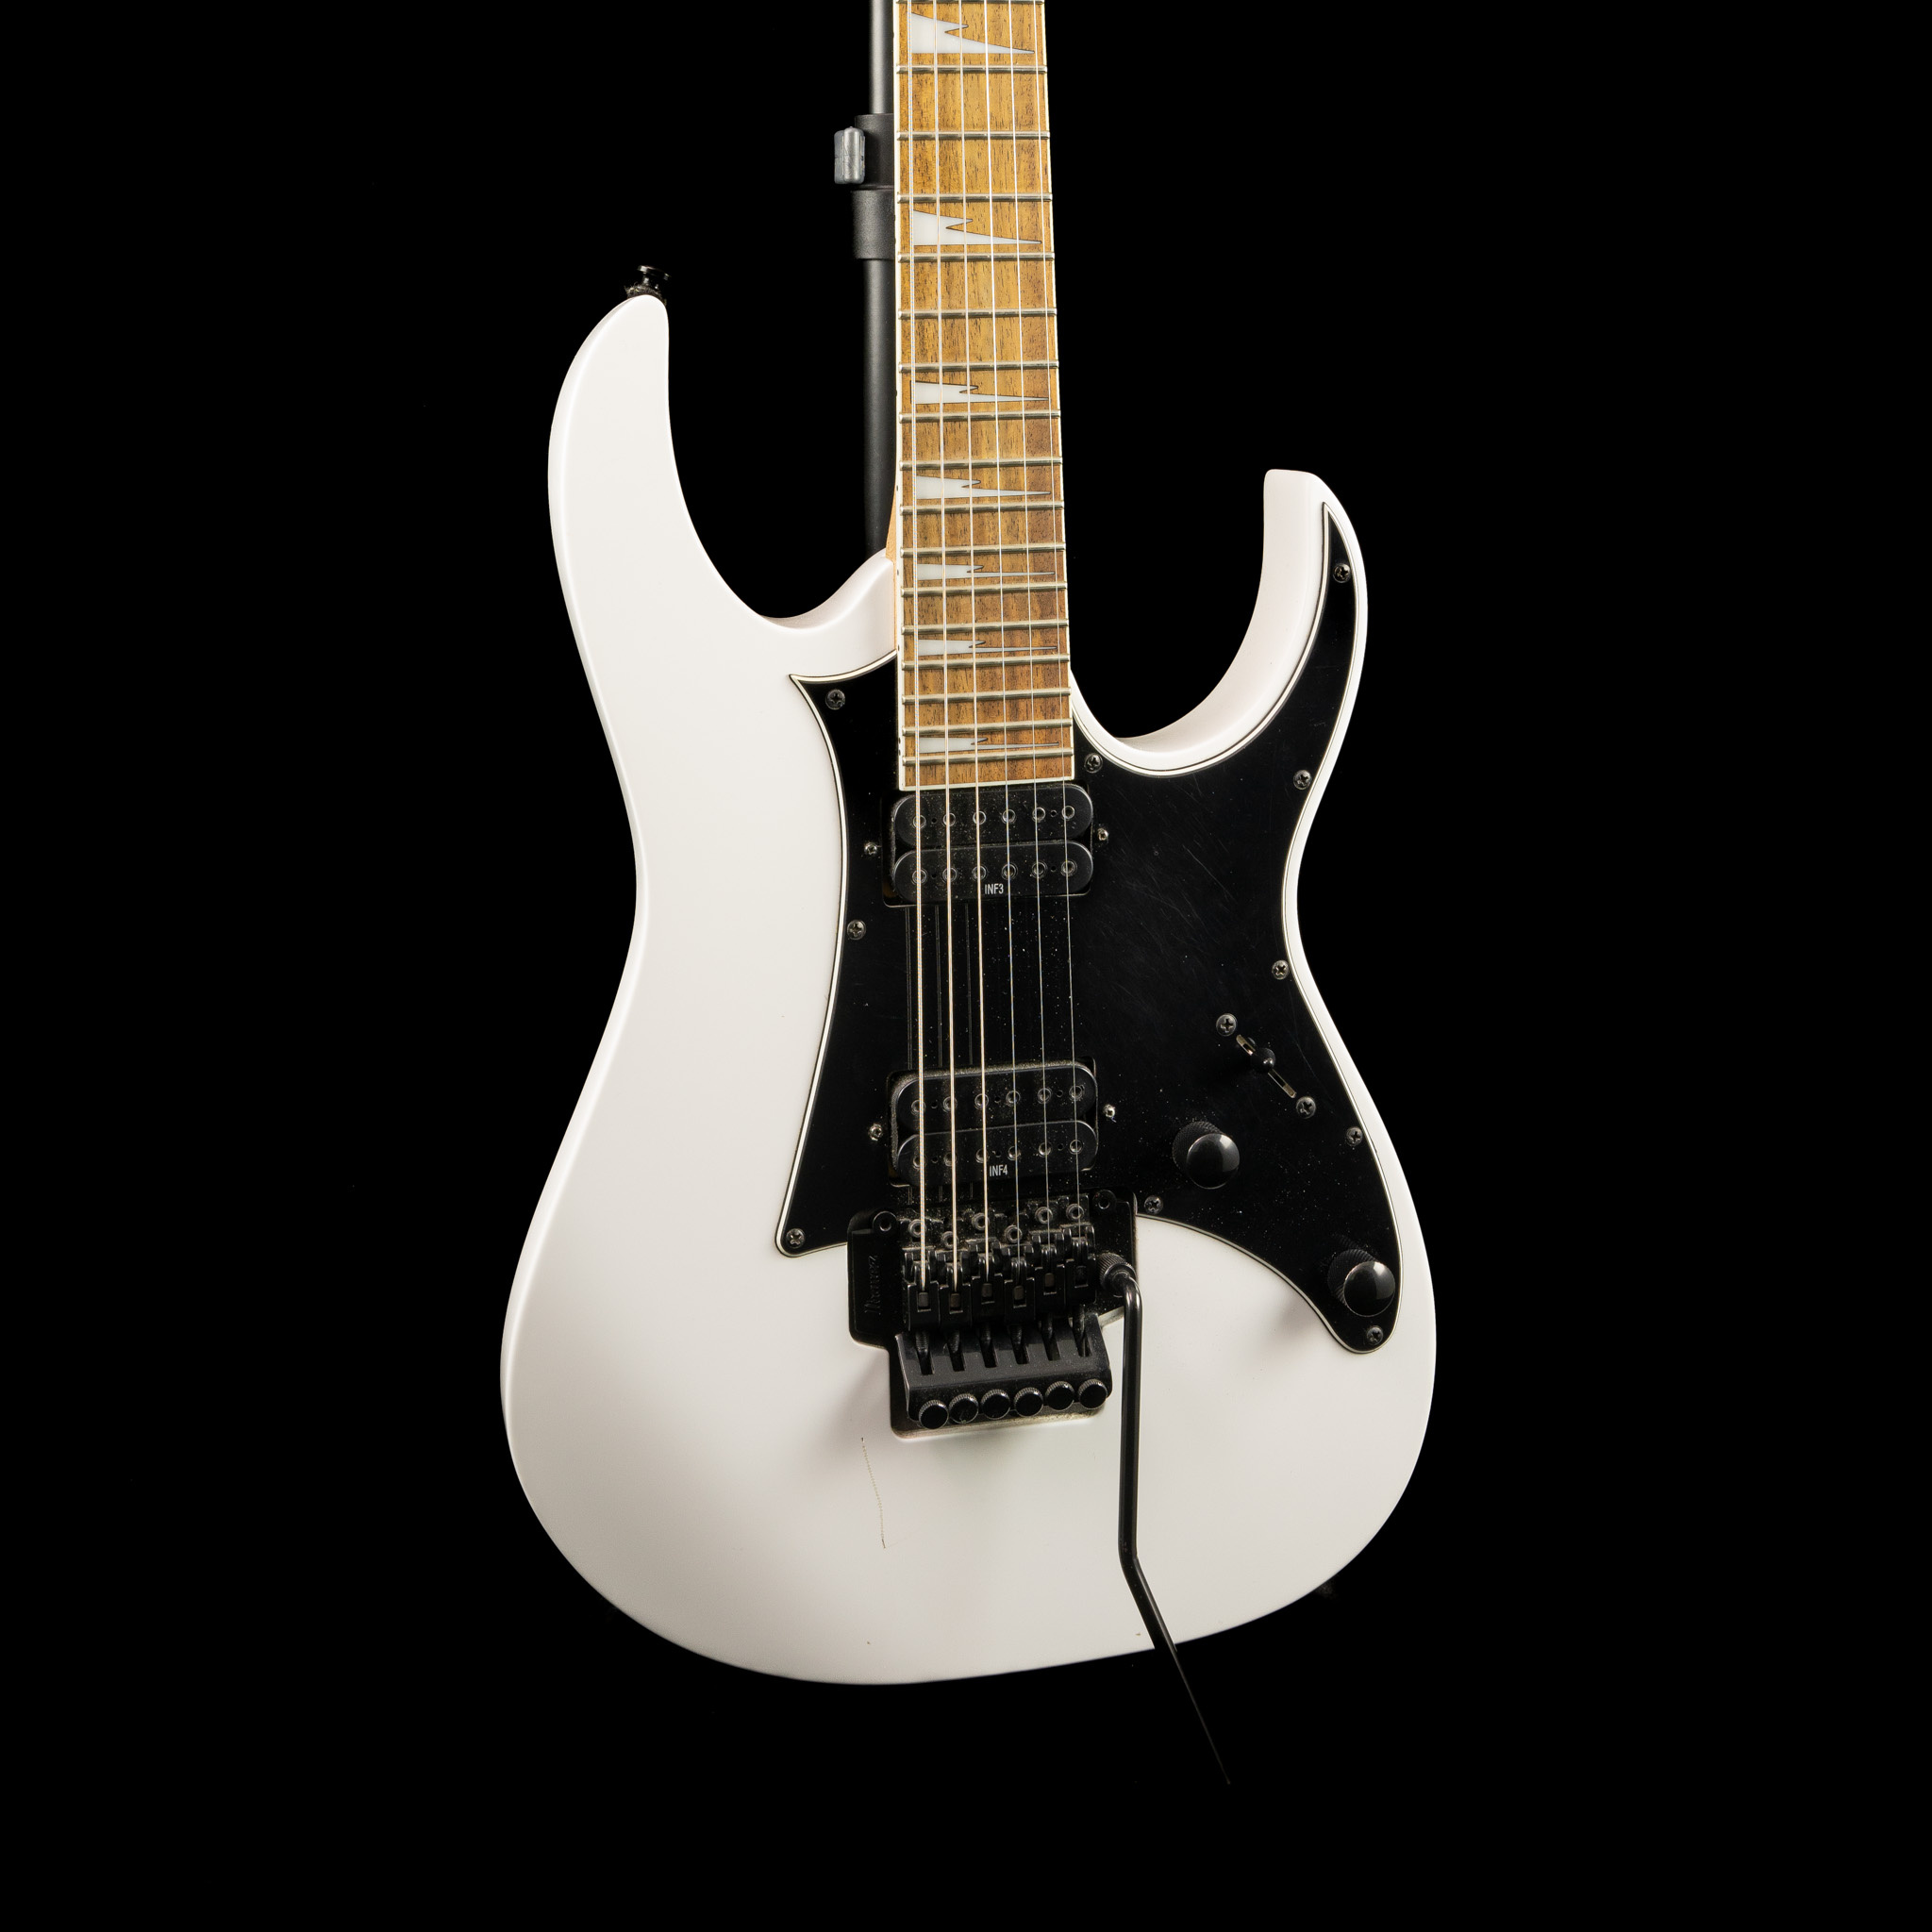 Ibanez RG6001, White-colored guitar, Pre-owned instrument, Lidgett Music offering, 2050x2050 HD Phone